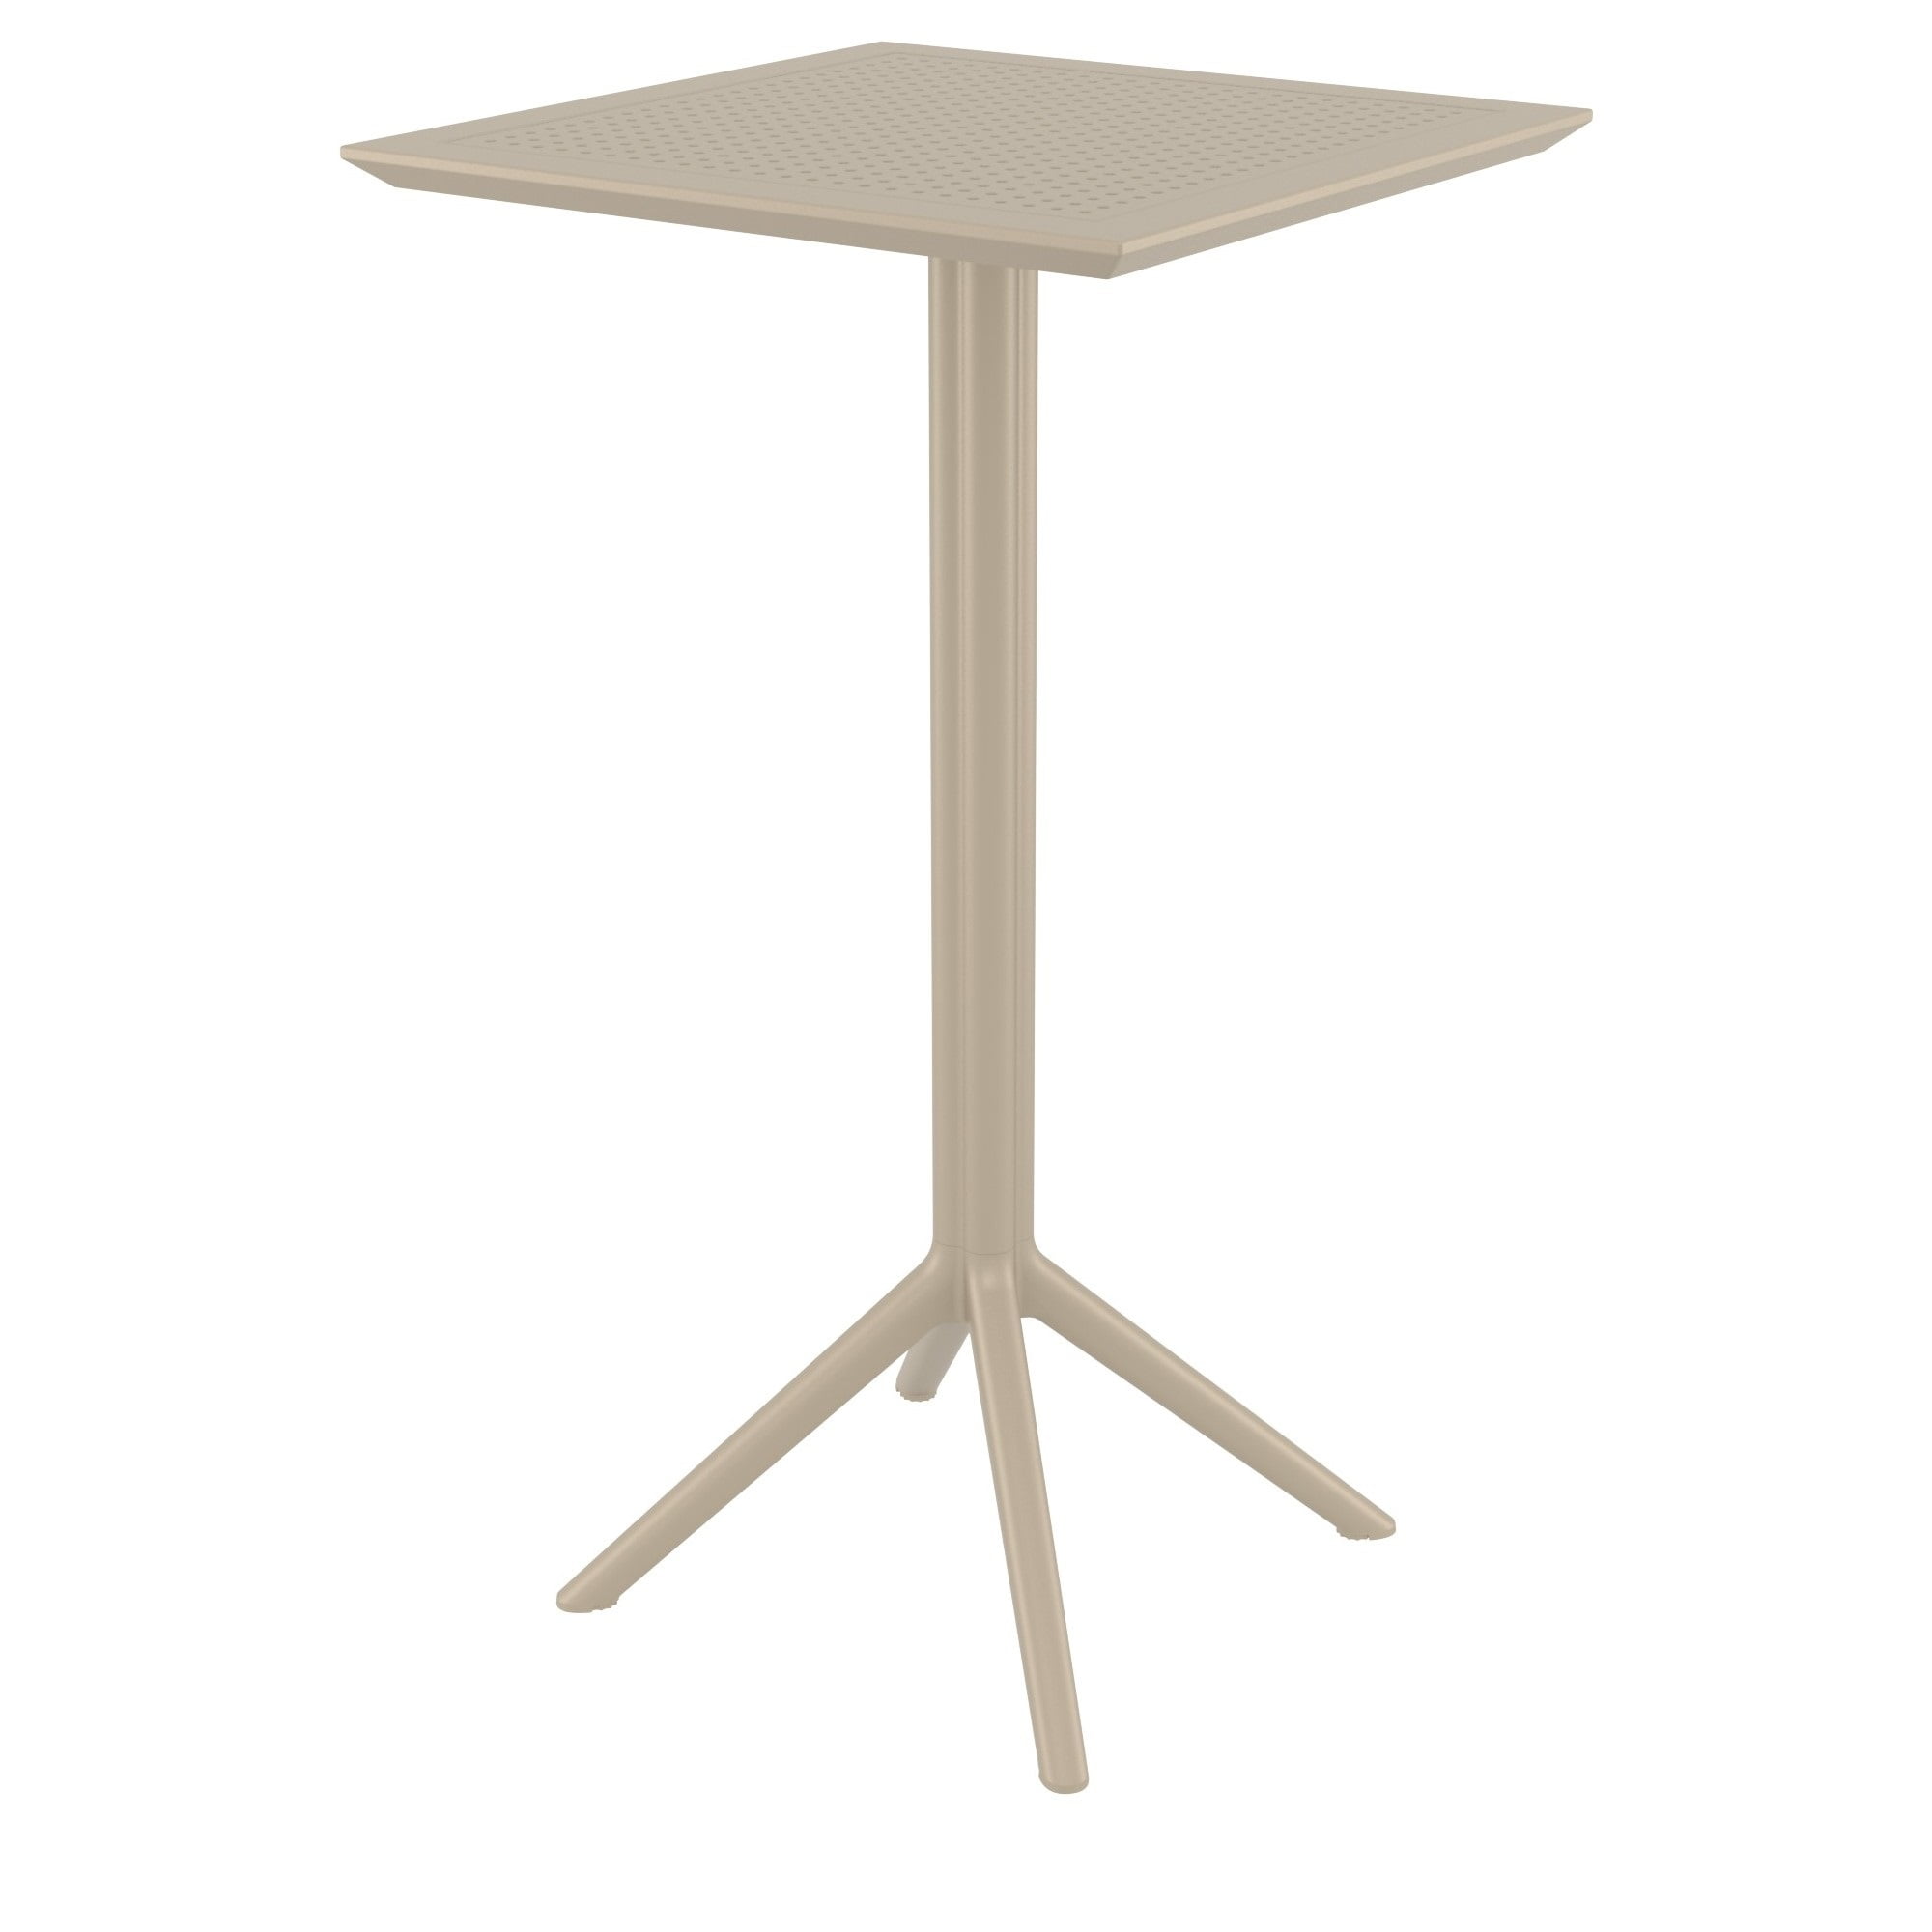 Isp116-dvr 24 In. Sky Square Folding Bar Table - Taupe